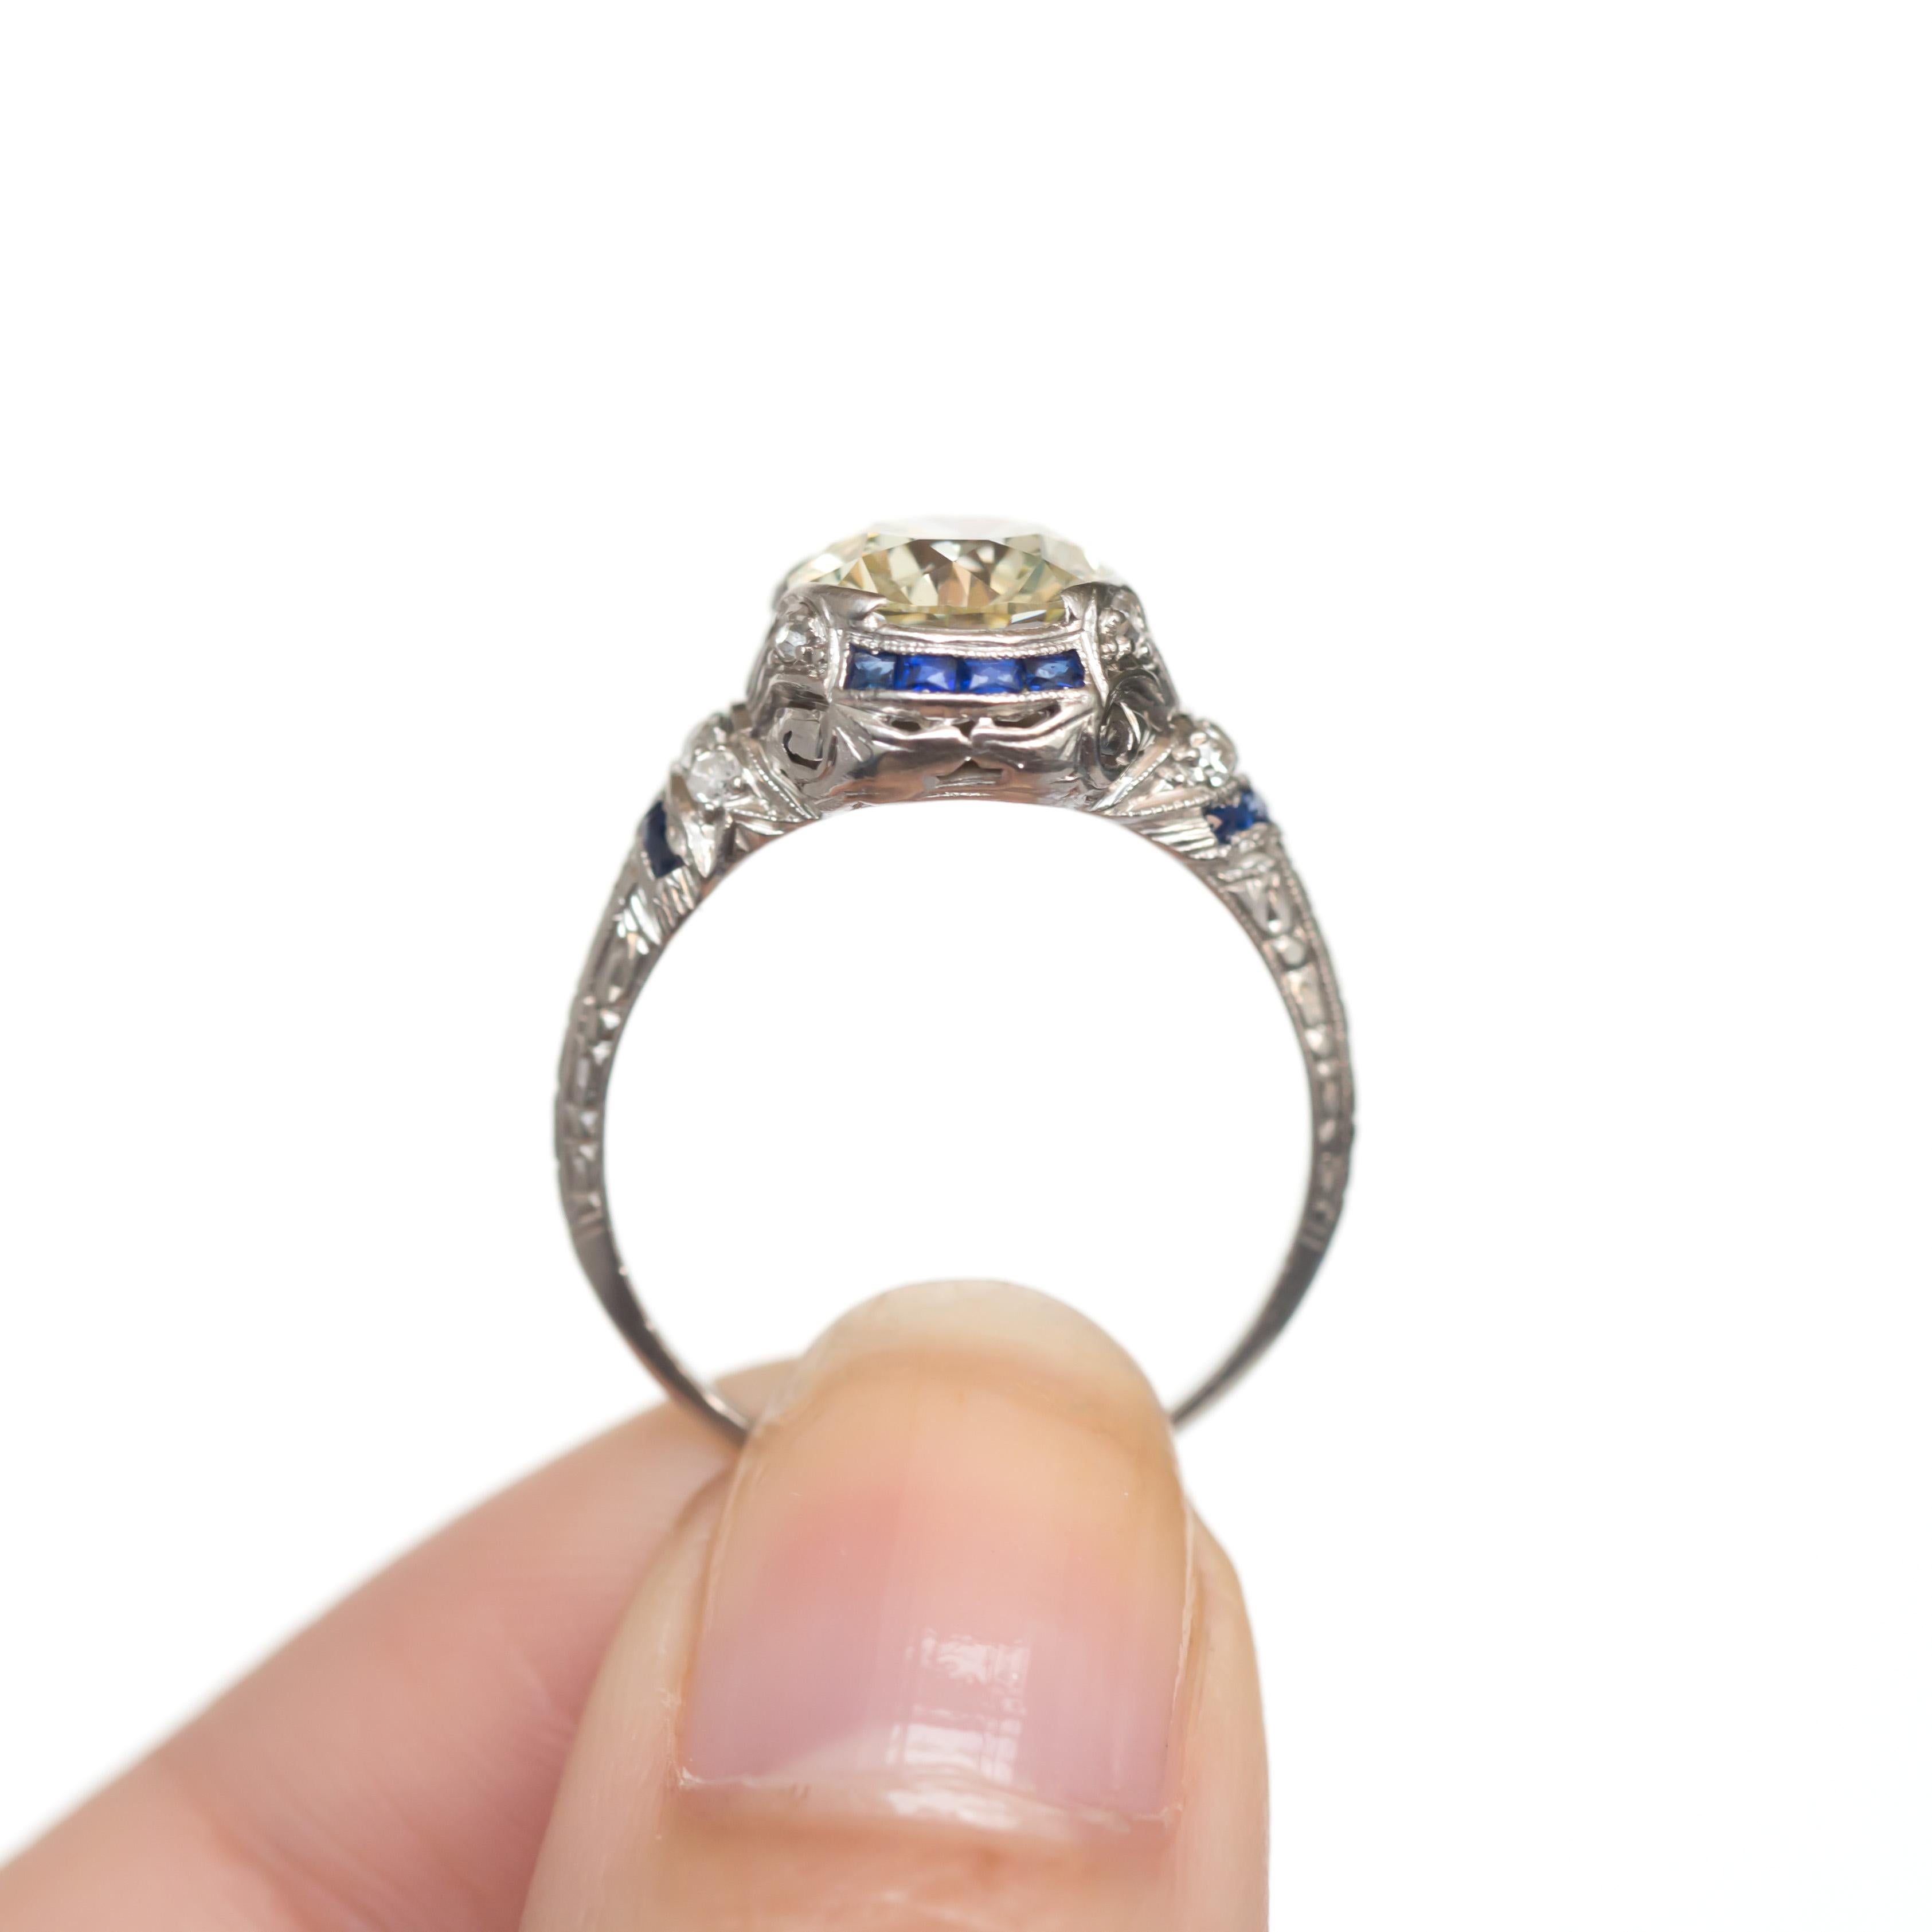 Women's GIA Certified 2.50 Carat Diamond and Sapphire Engagement Ring